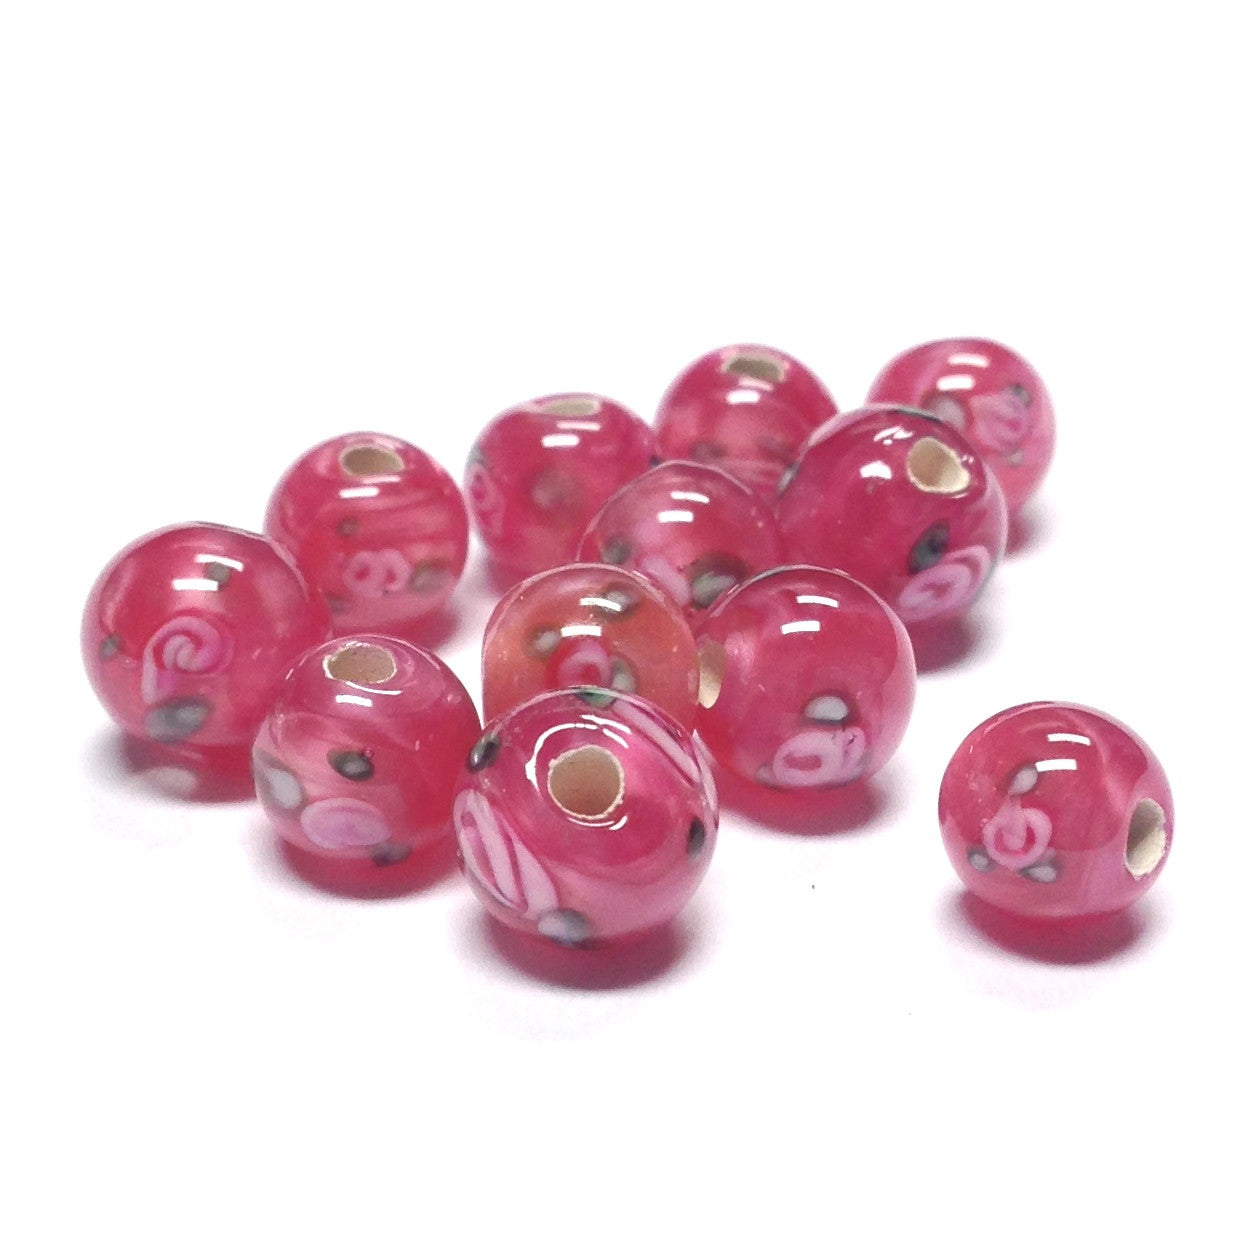 6MM Rose Flower Glass Bead (24 pieces)